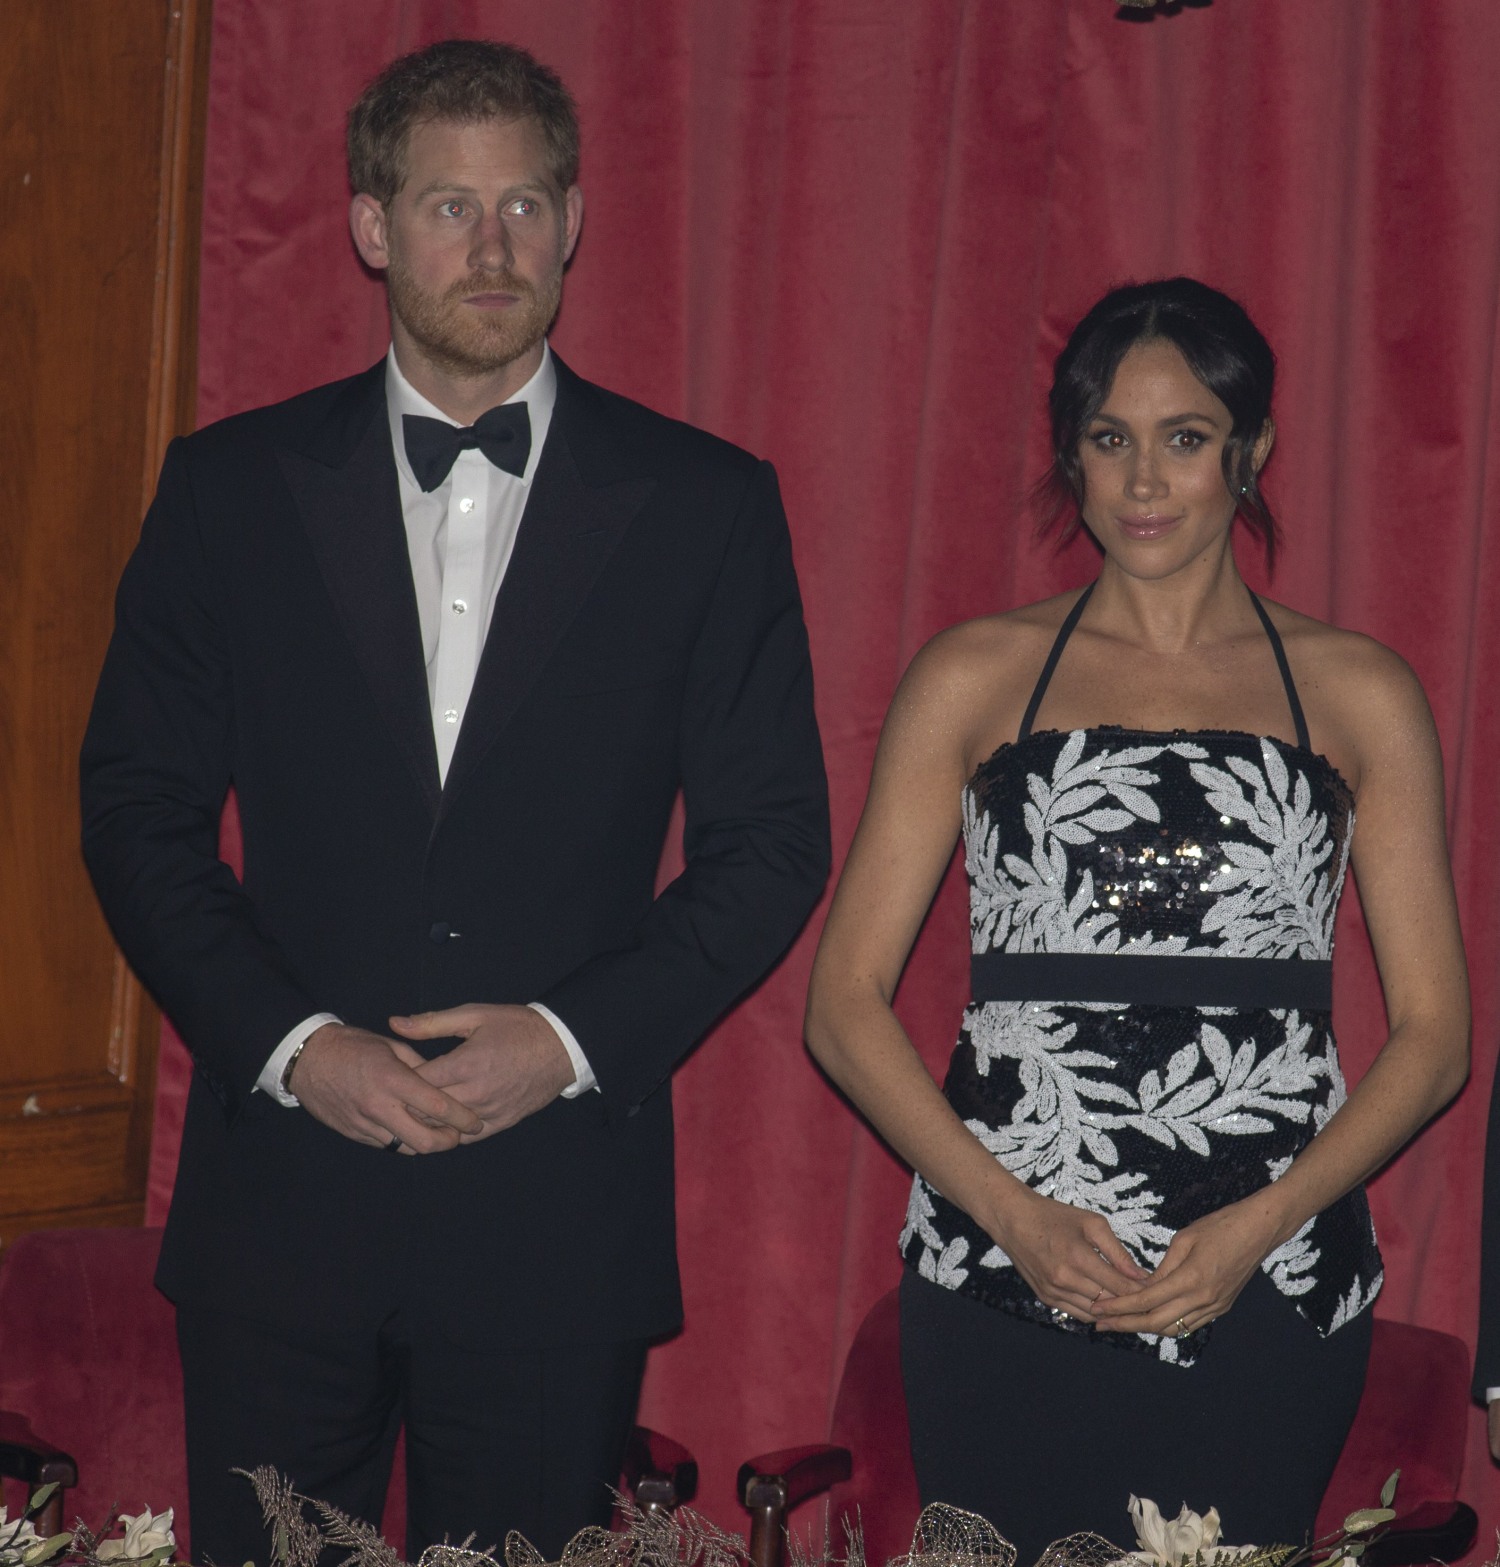 Prince Harry, Duke of Sussex, and Meghan, Duchess of Sussex, attend the Royal Variety Performance at the Royal Albert Hall